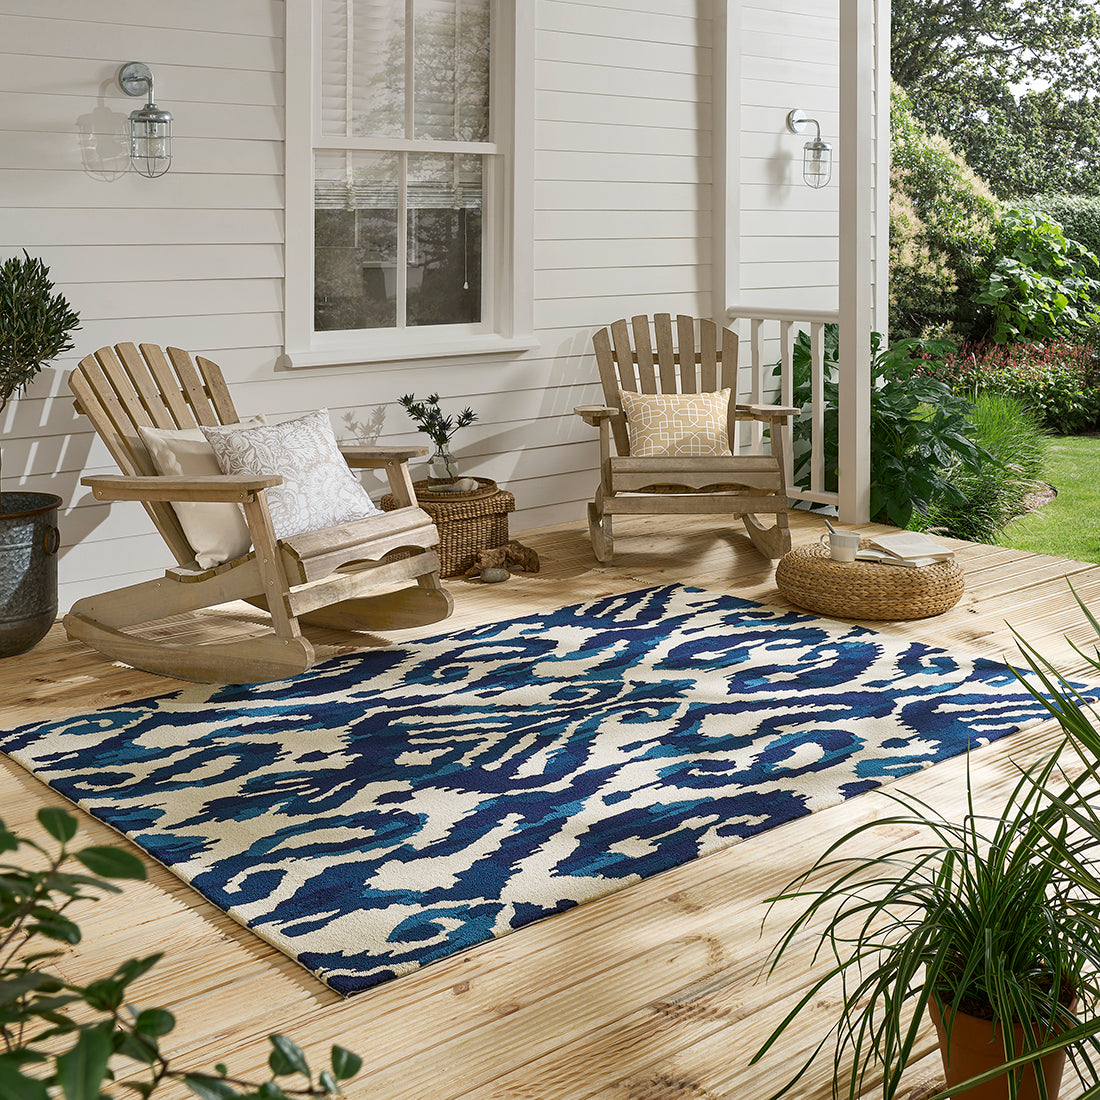 blue indoor/outdoor rug with abstract pattern
